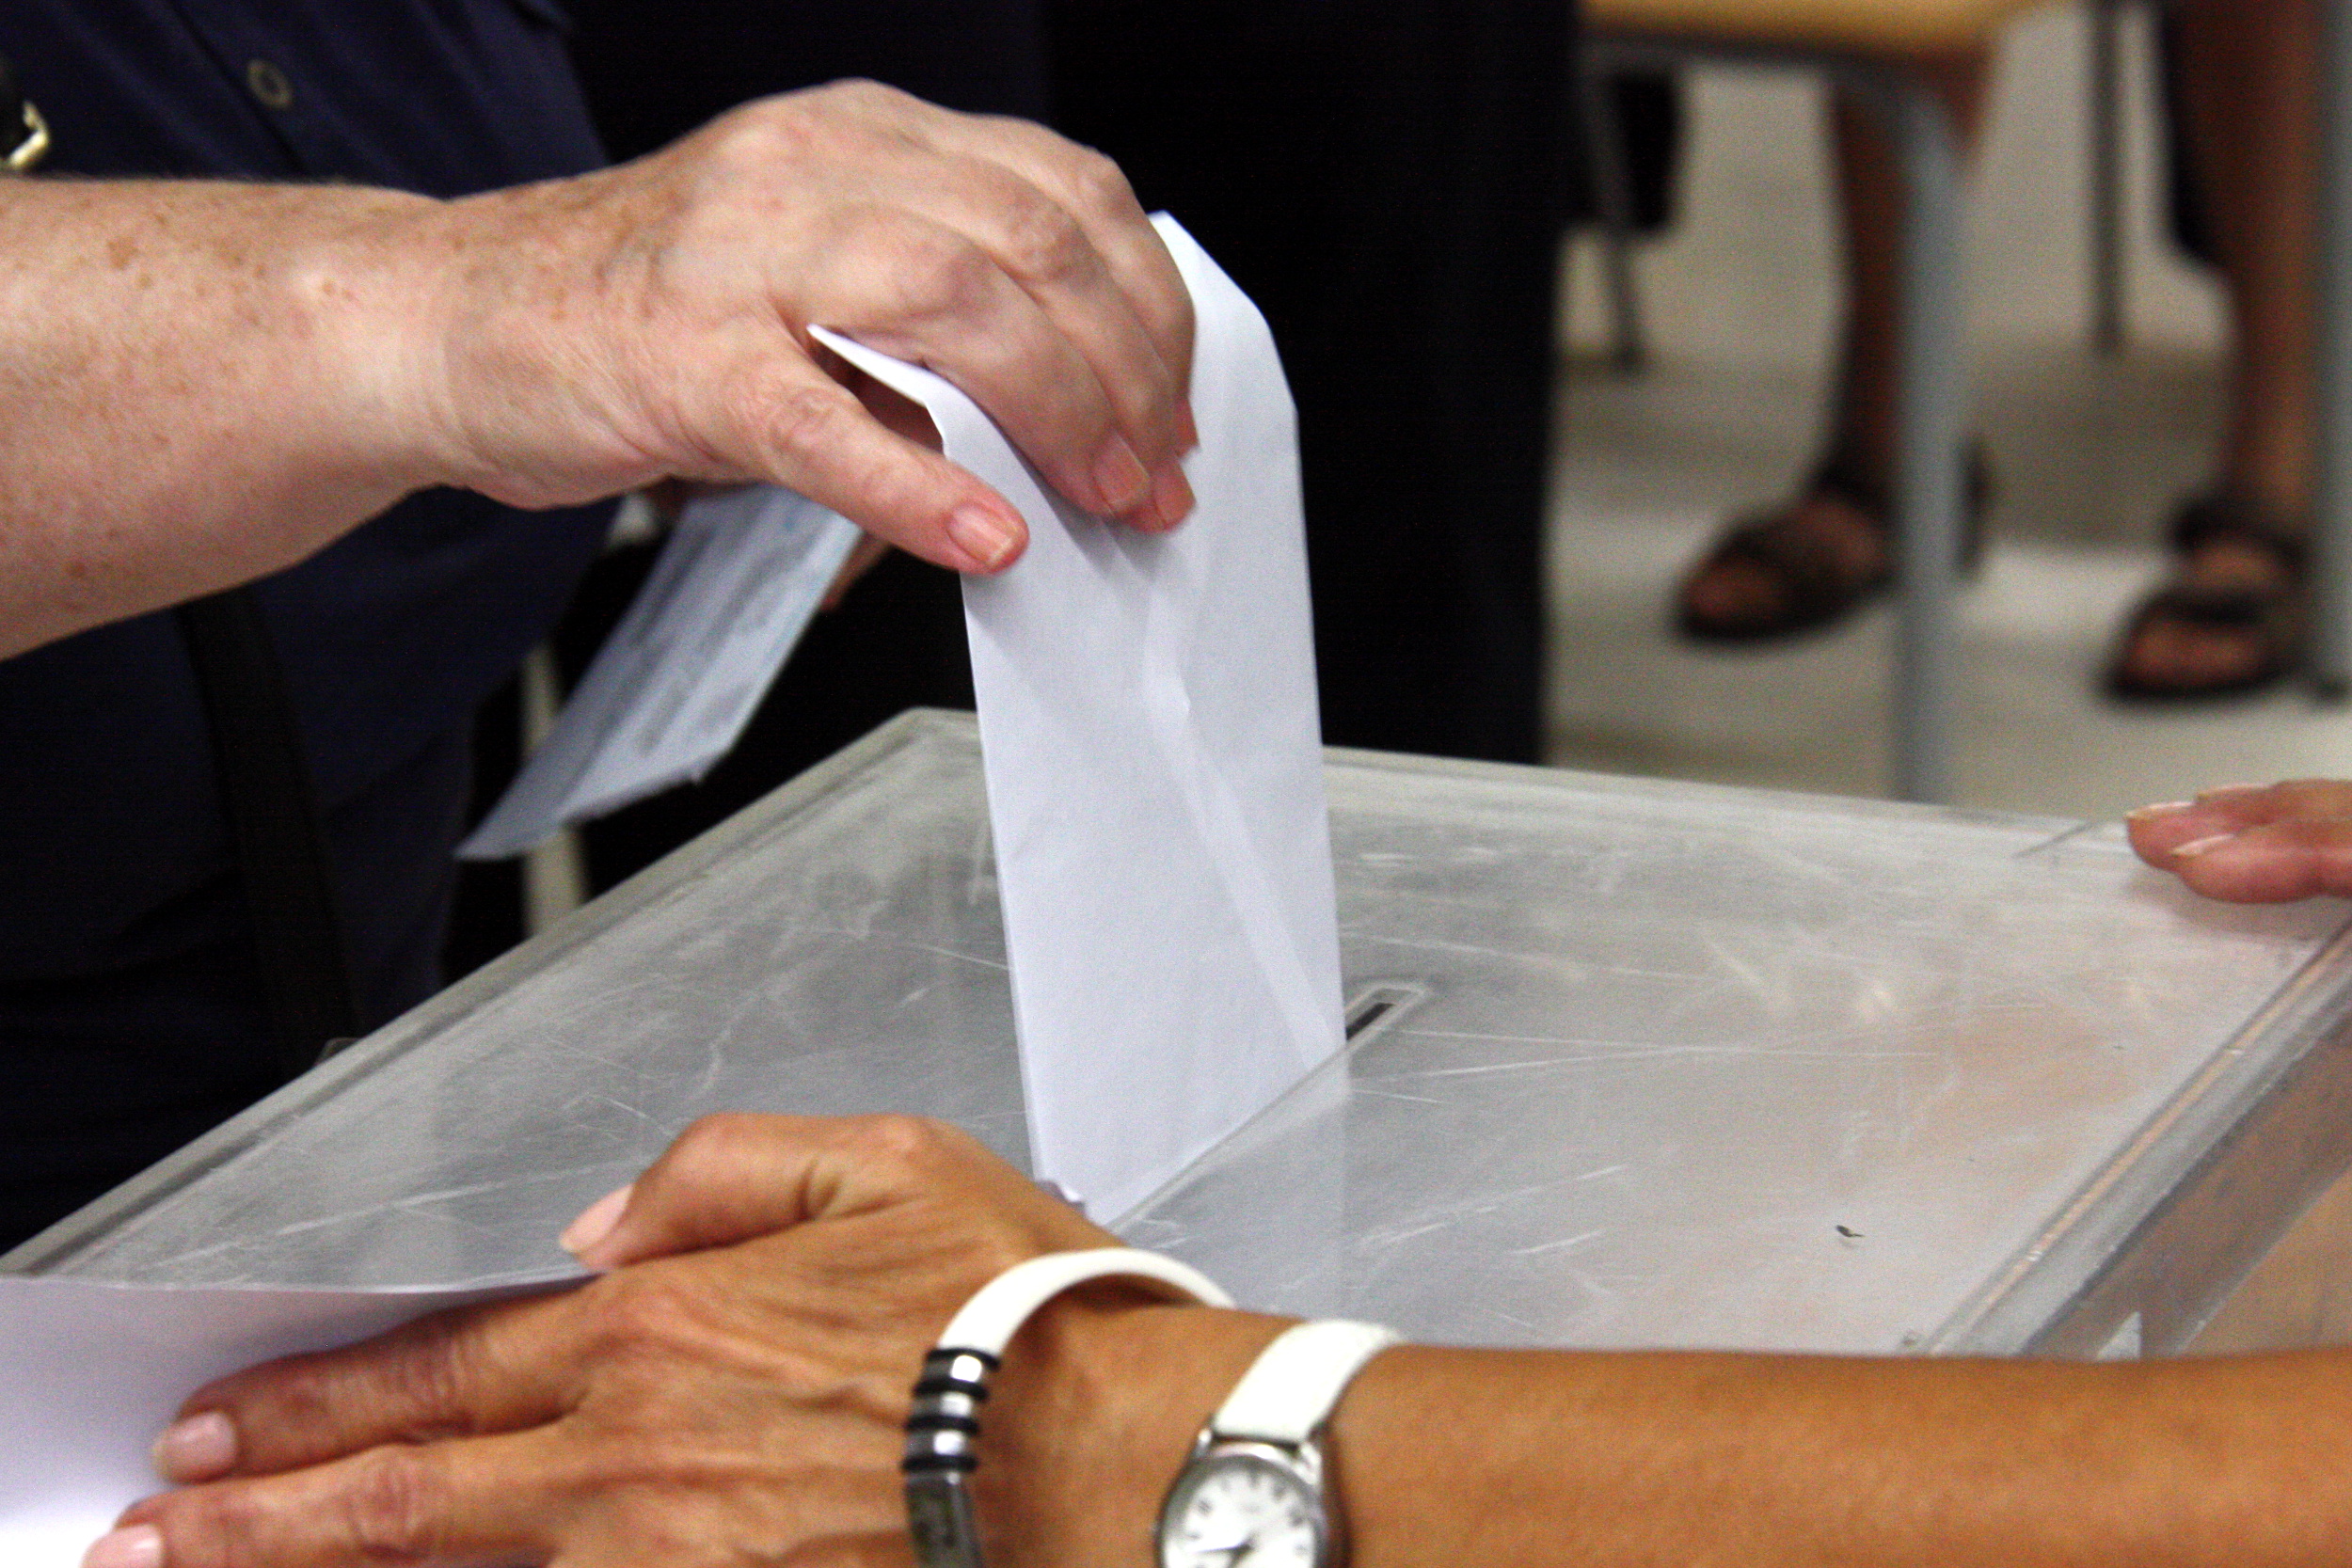 Voter casting their vote at a polling station (by ACN)